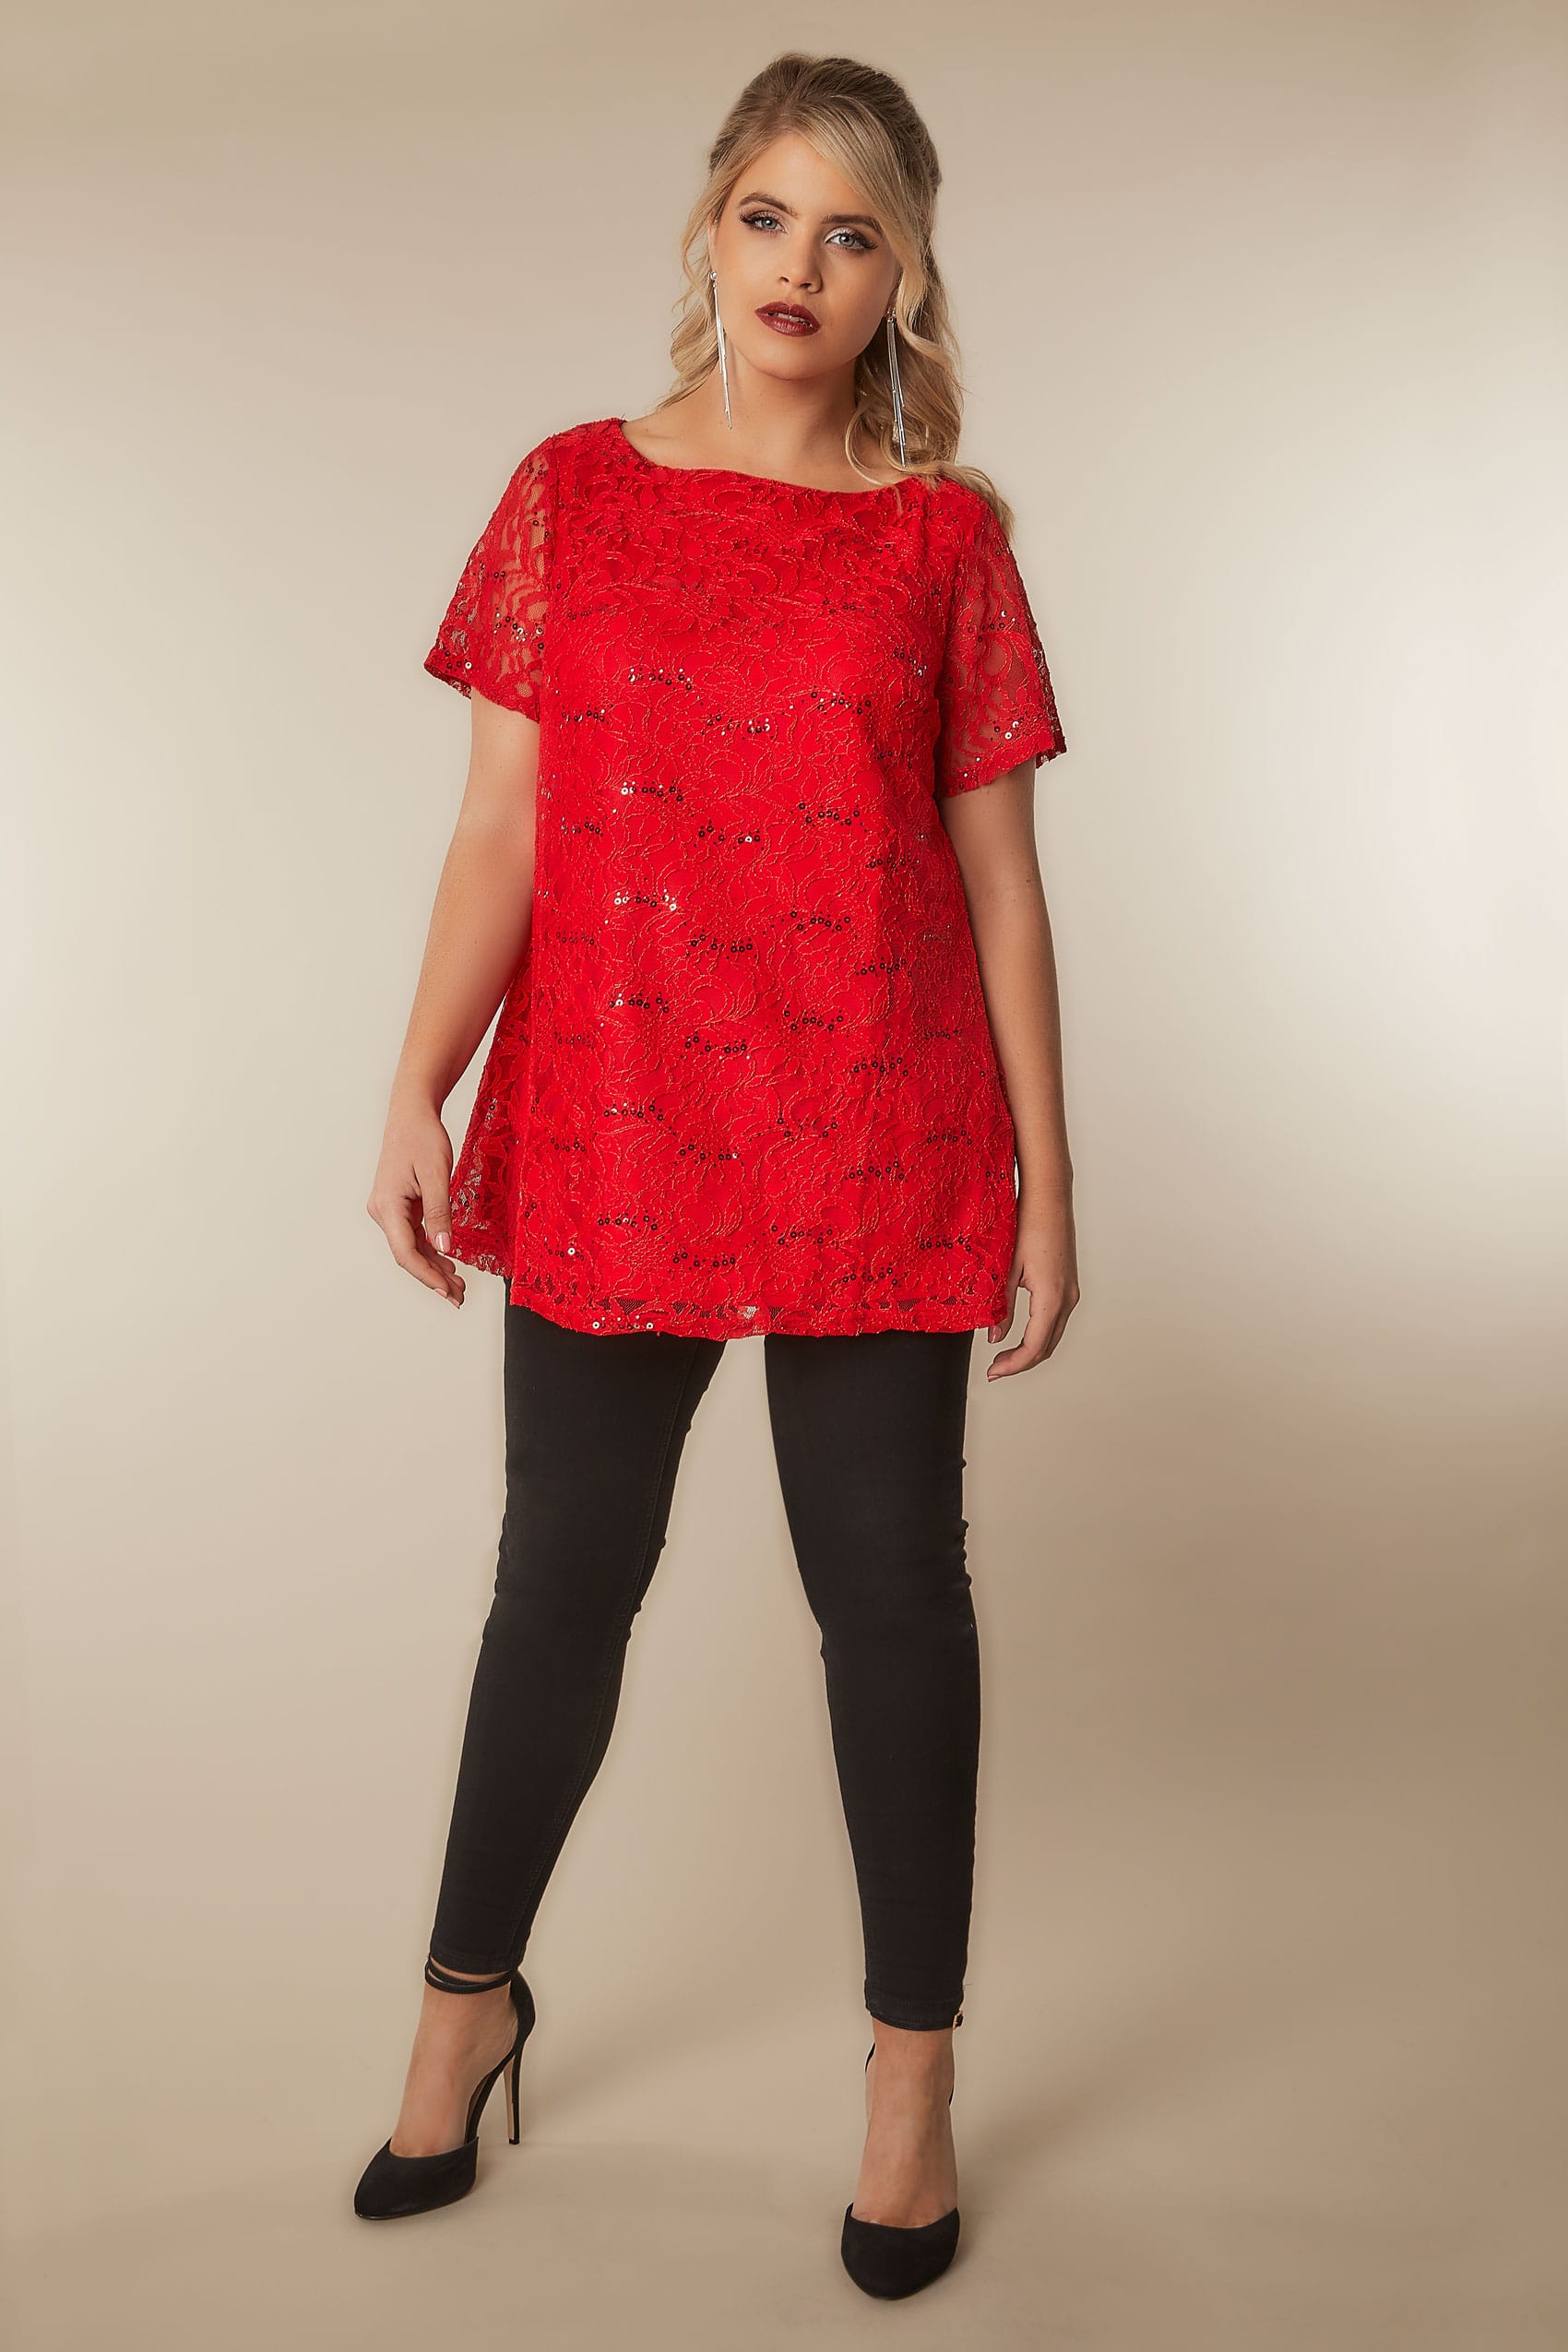 Red Lace Shell Top With Sequin Details, Plus size 16 to 36